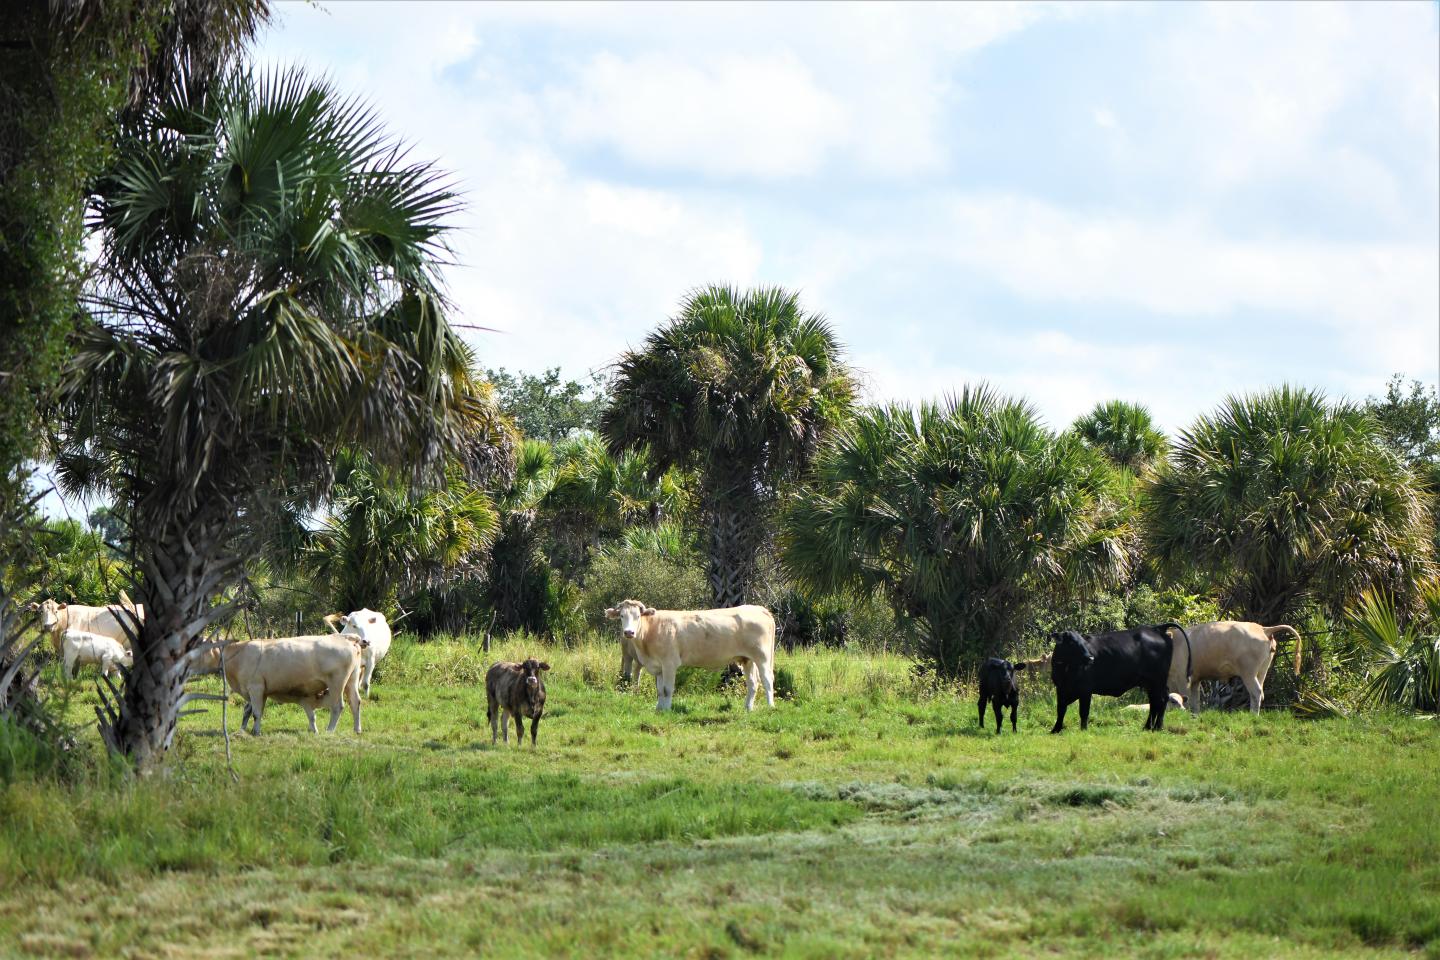 Aberdeen Angus and American Brahman cattle graze the pastures on a 632-acre ranch in Okeechobee County, Florida (September 2022). Photo by Cynthia Portalatin, NRCS Public Affairs.